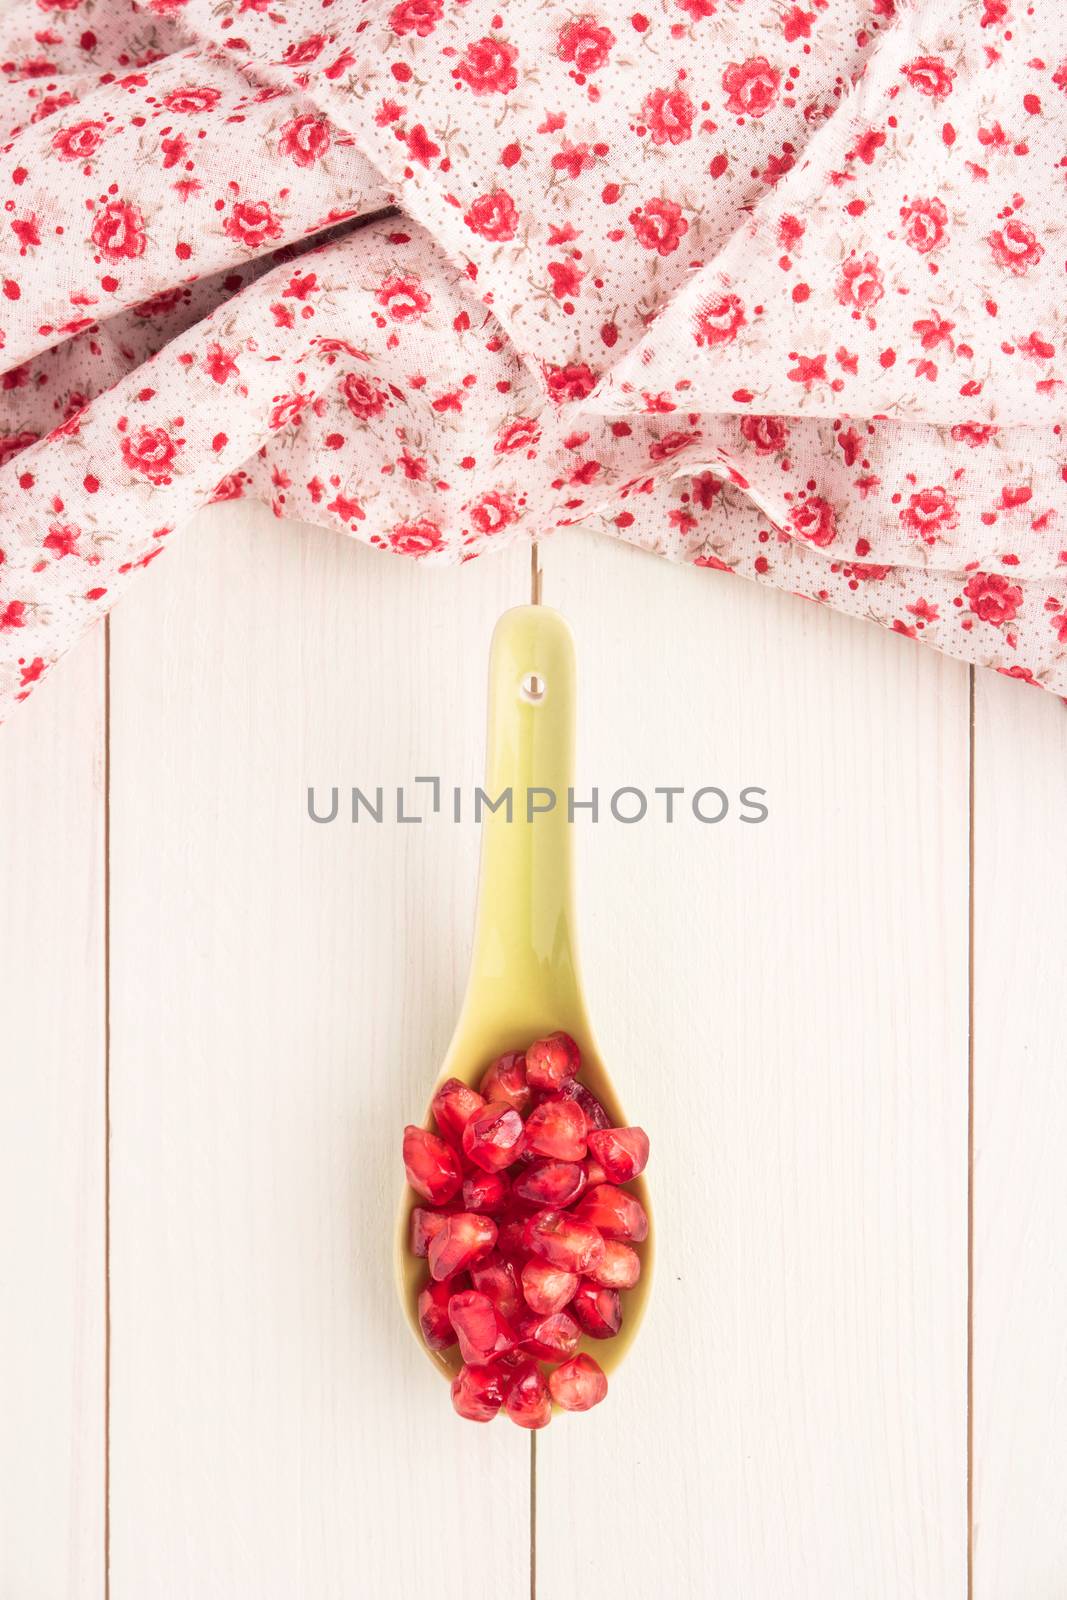 Seeds of red ripe peeled pomegranate on ceramic spoon. by AnaMarques